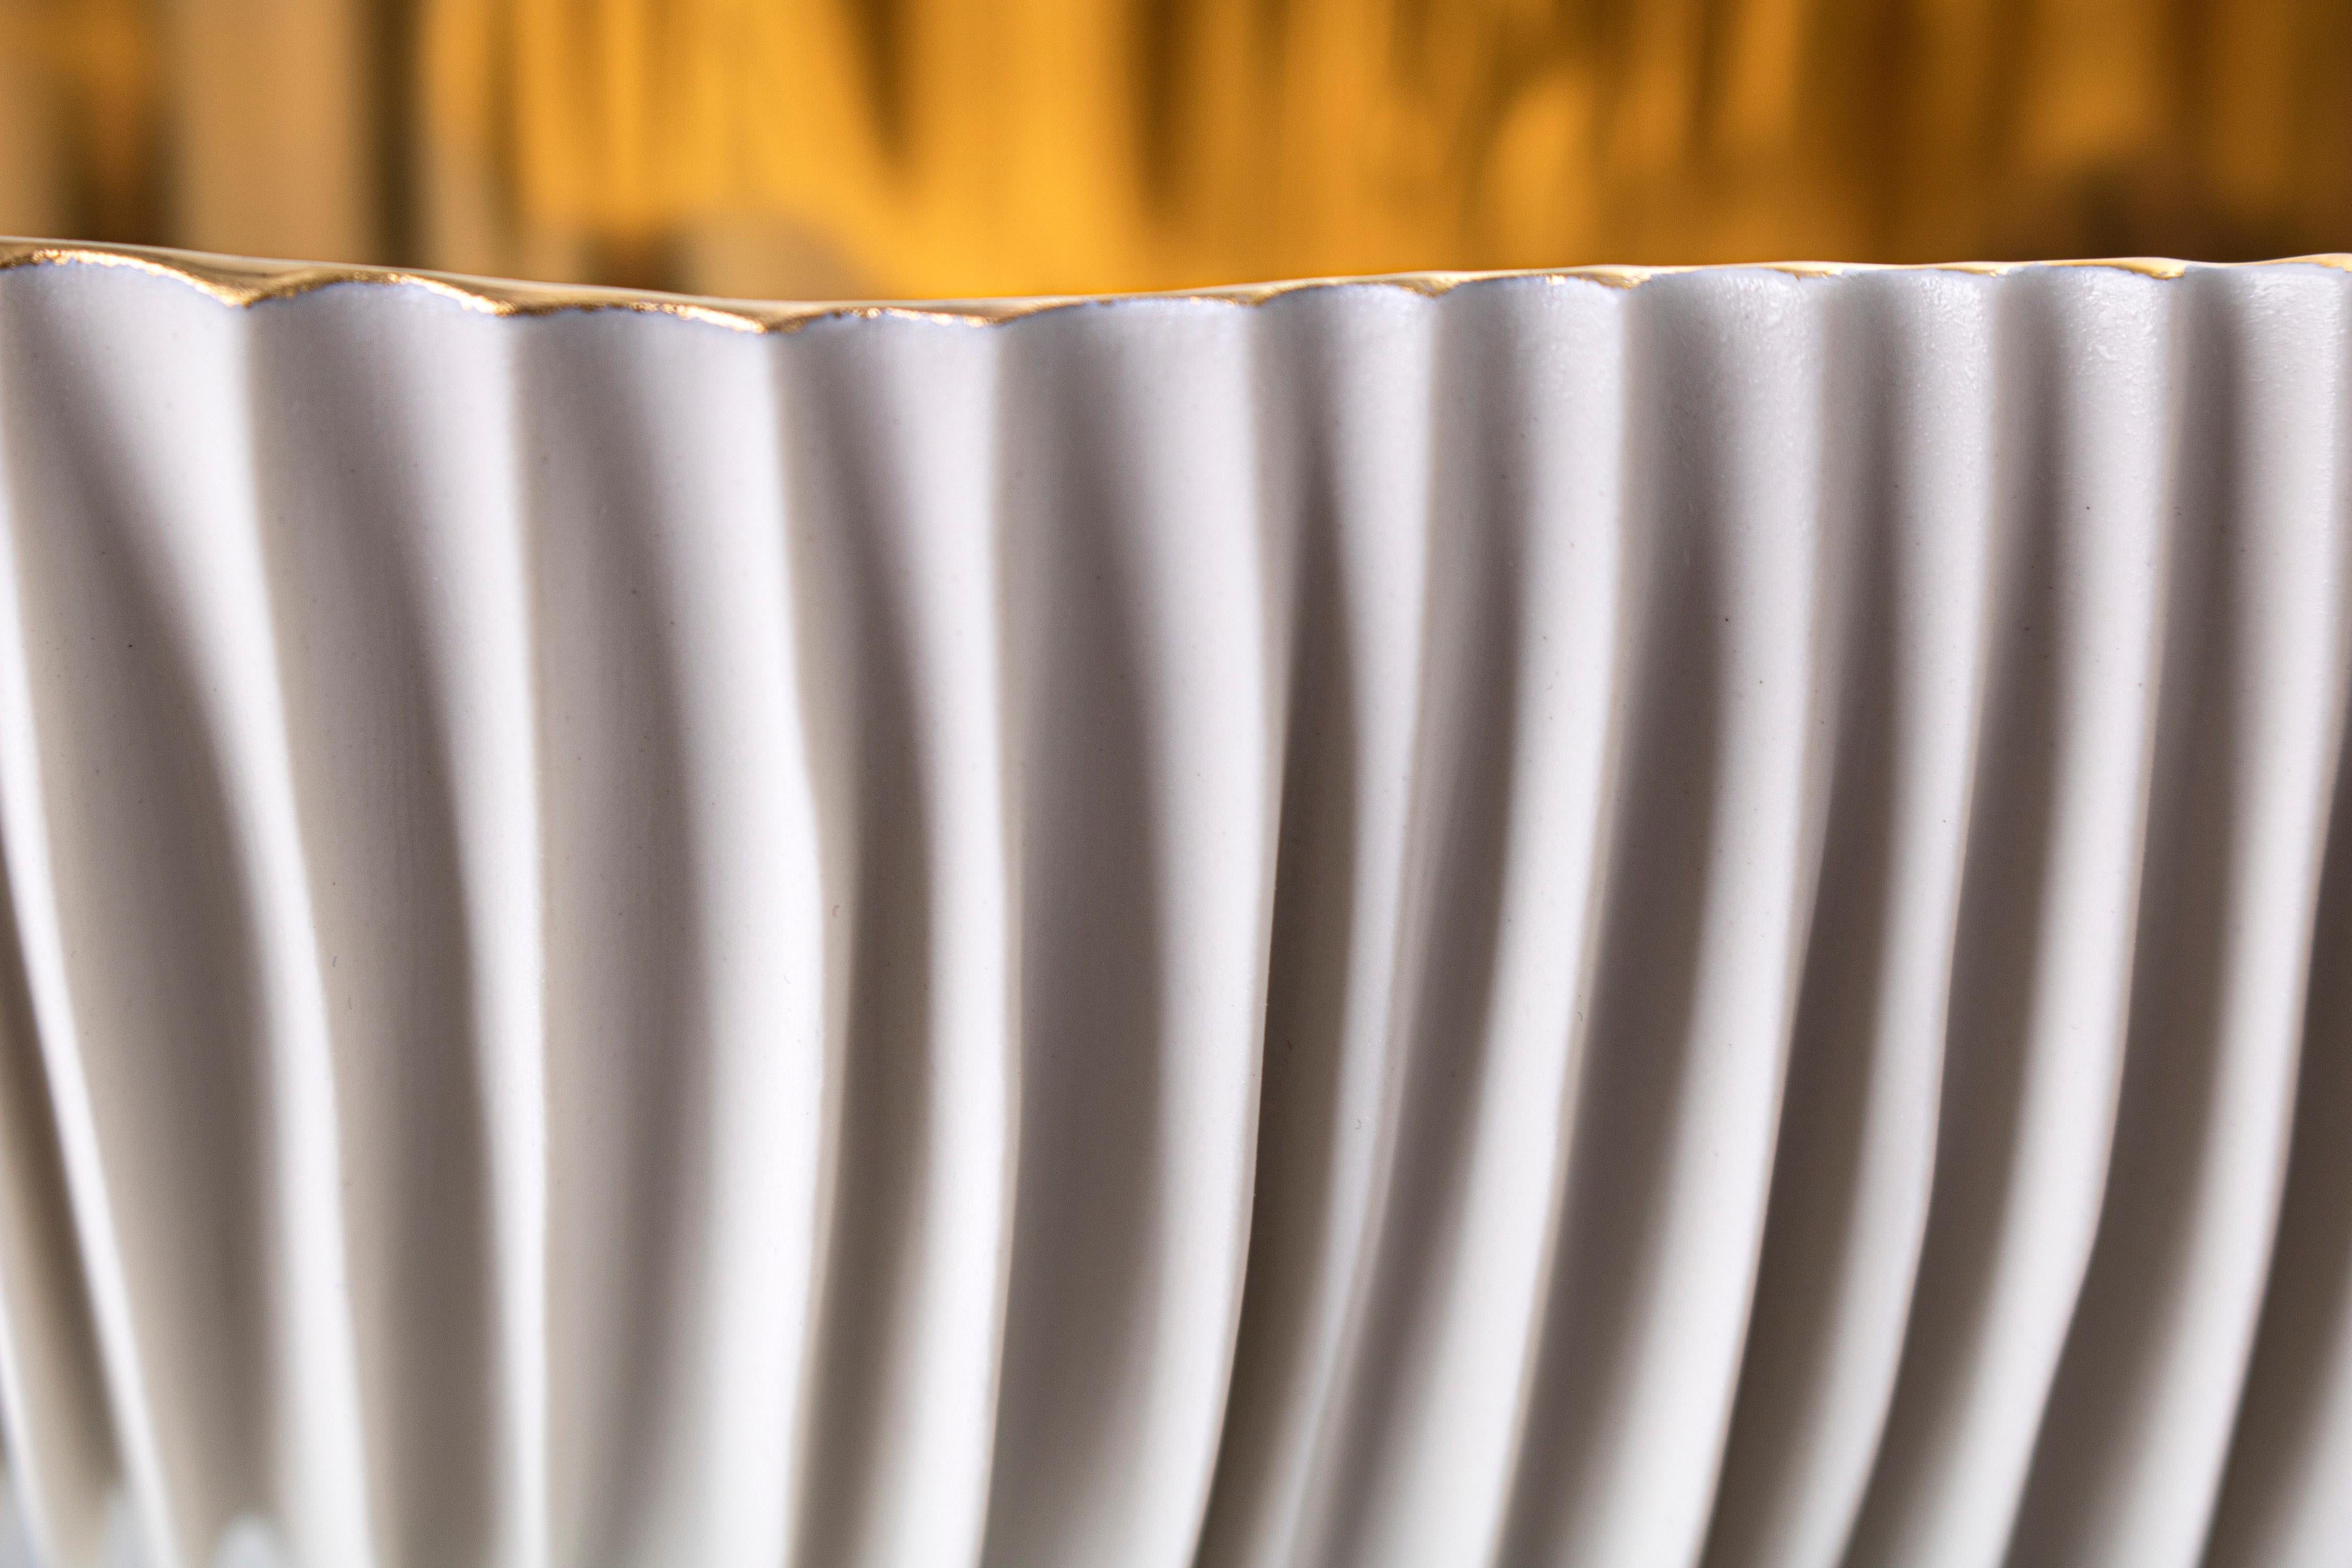 The eye lose itself amid a thousand channels in a succession of plans chasing the dense lamellar structure. Snow-white porcelain bowl from which emerge the spark of precious gold 23k, applied by hand and fixed through an additional meticulous firing